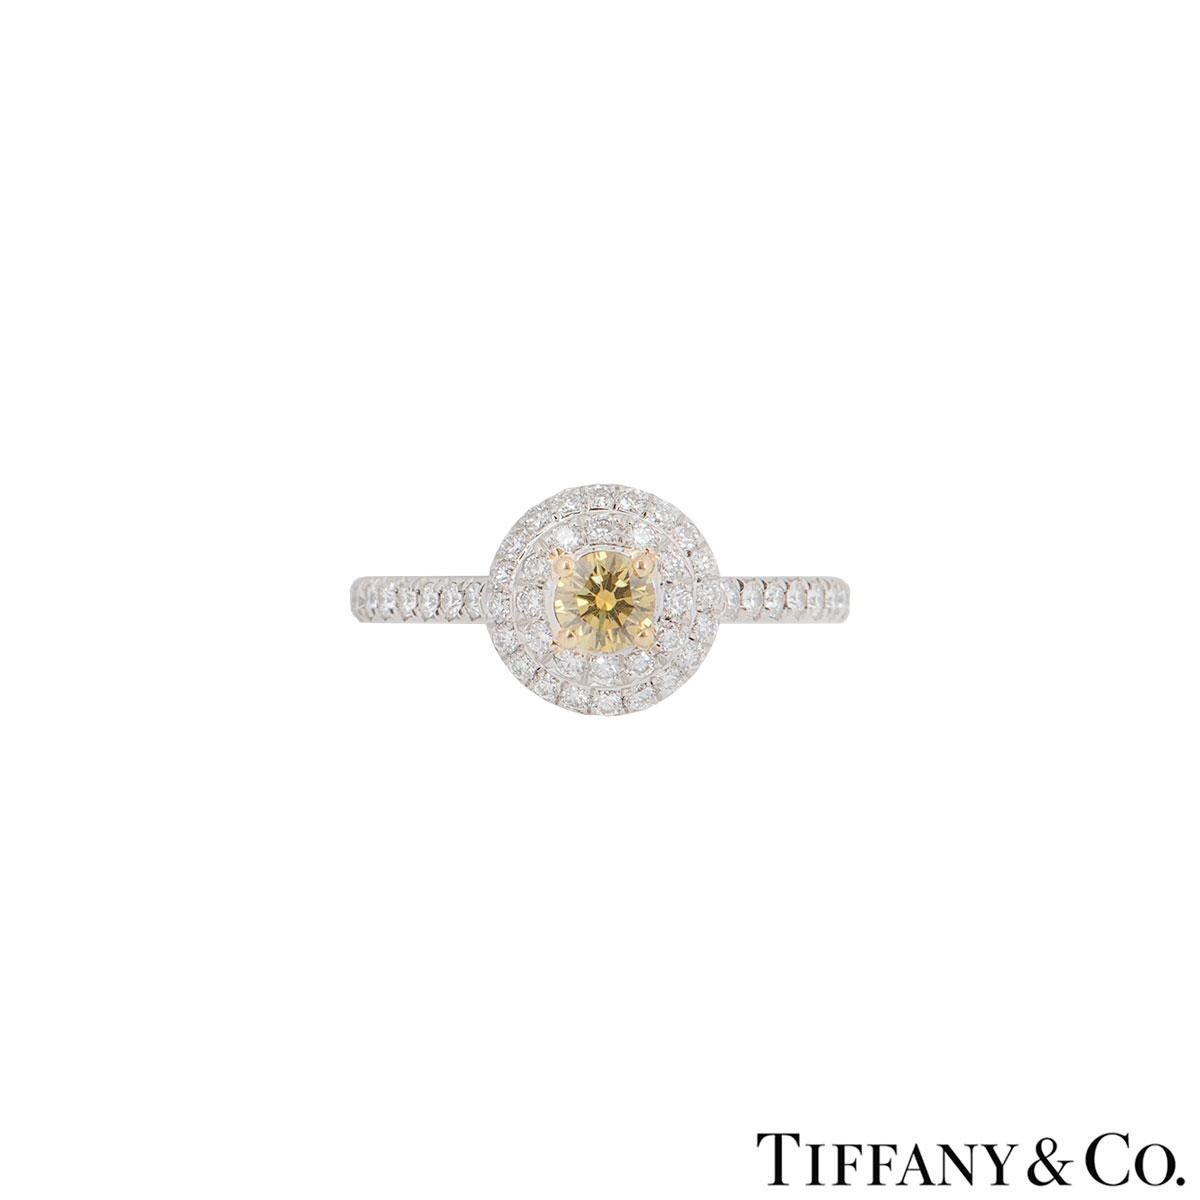 An alluring platinum diamond ring by Tiffany & Co. from the Soleste collection. The ring comprises of a fancy yellow round brilliant cut diamond in the centre surrounded by double pave set diamonds in a halo setting and on the shoulders. The fancy